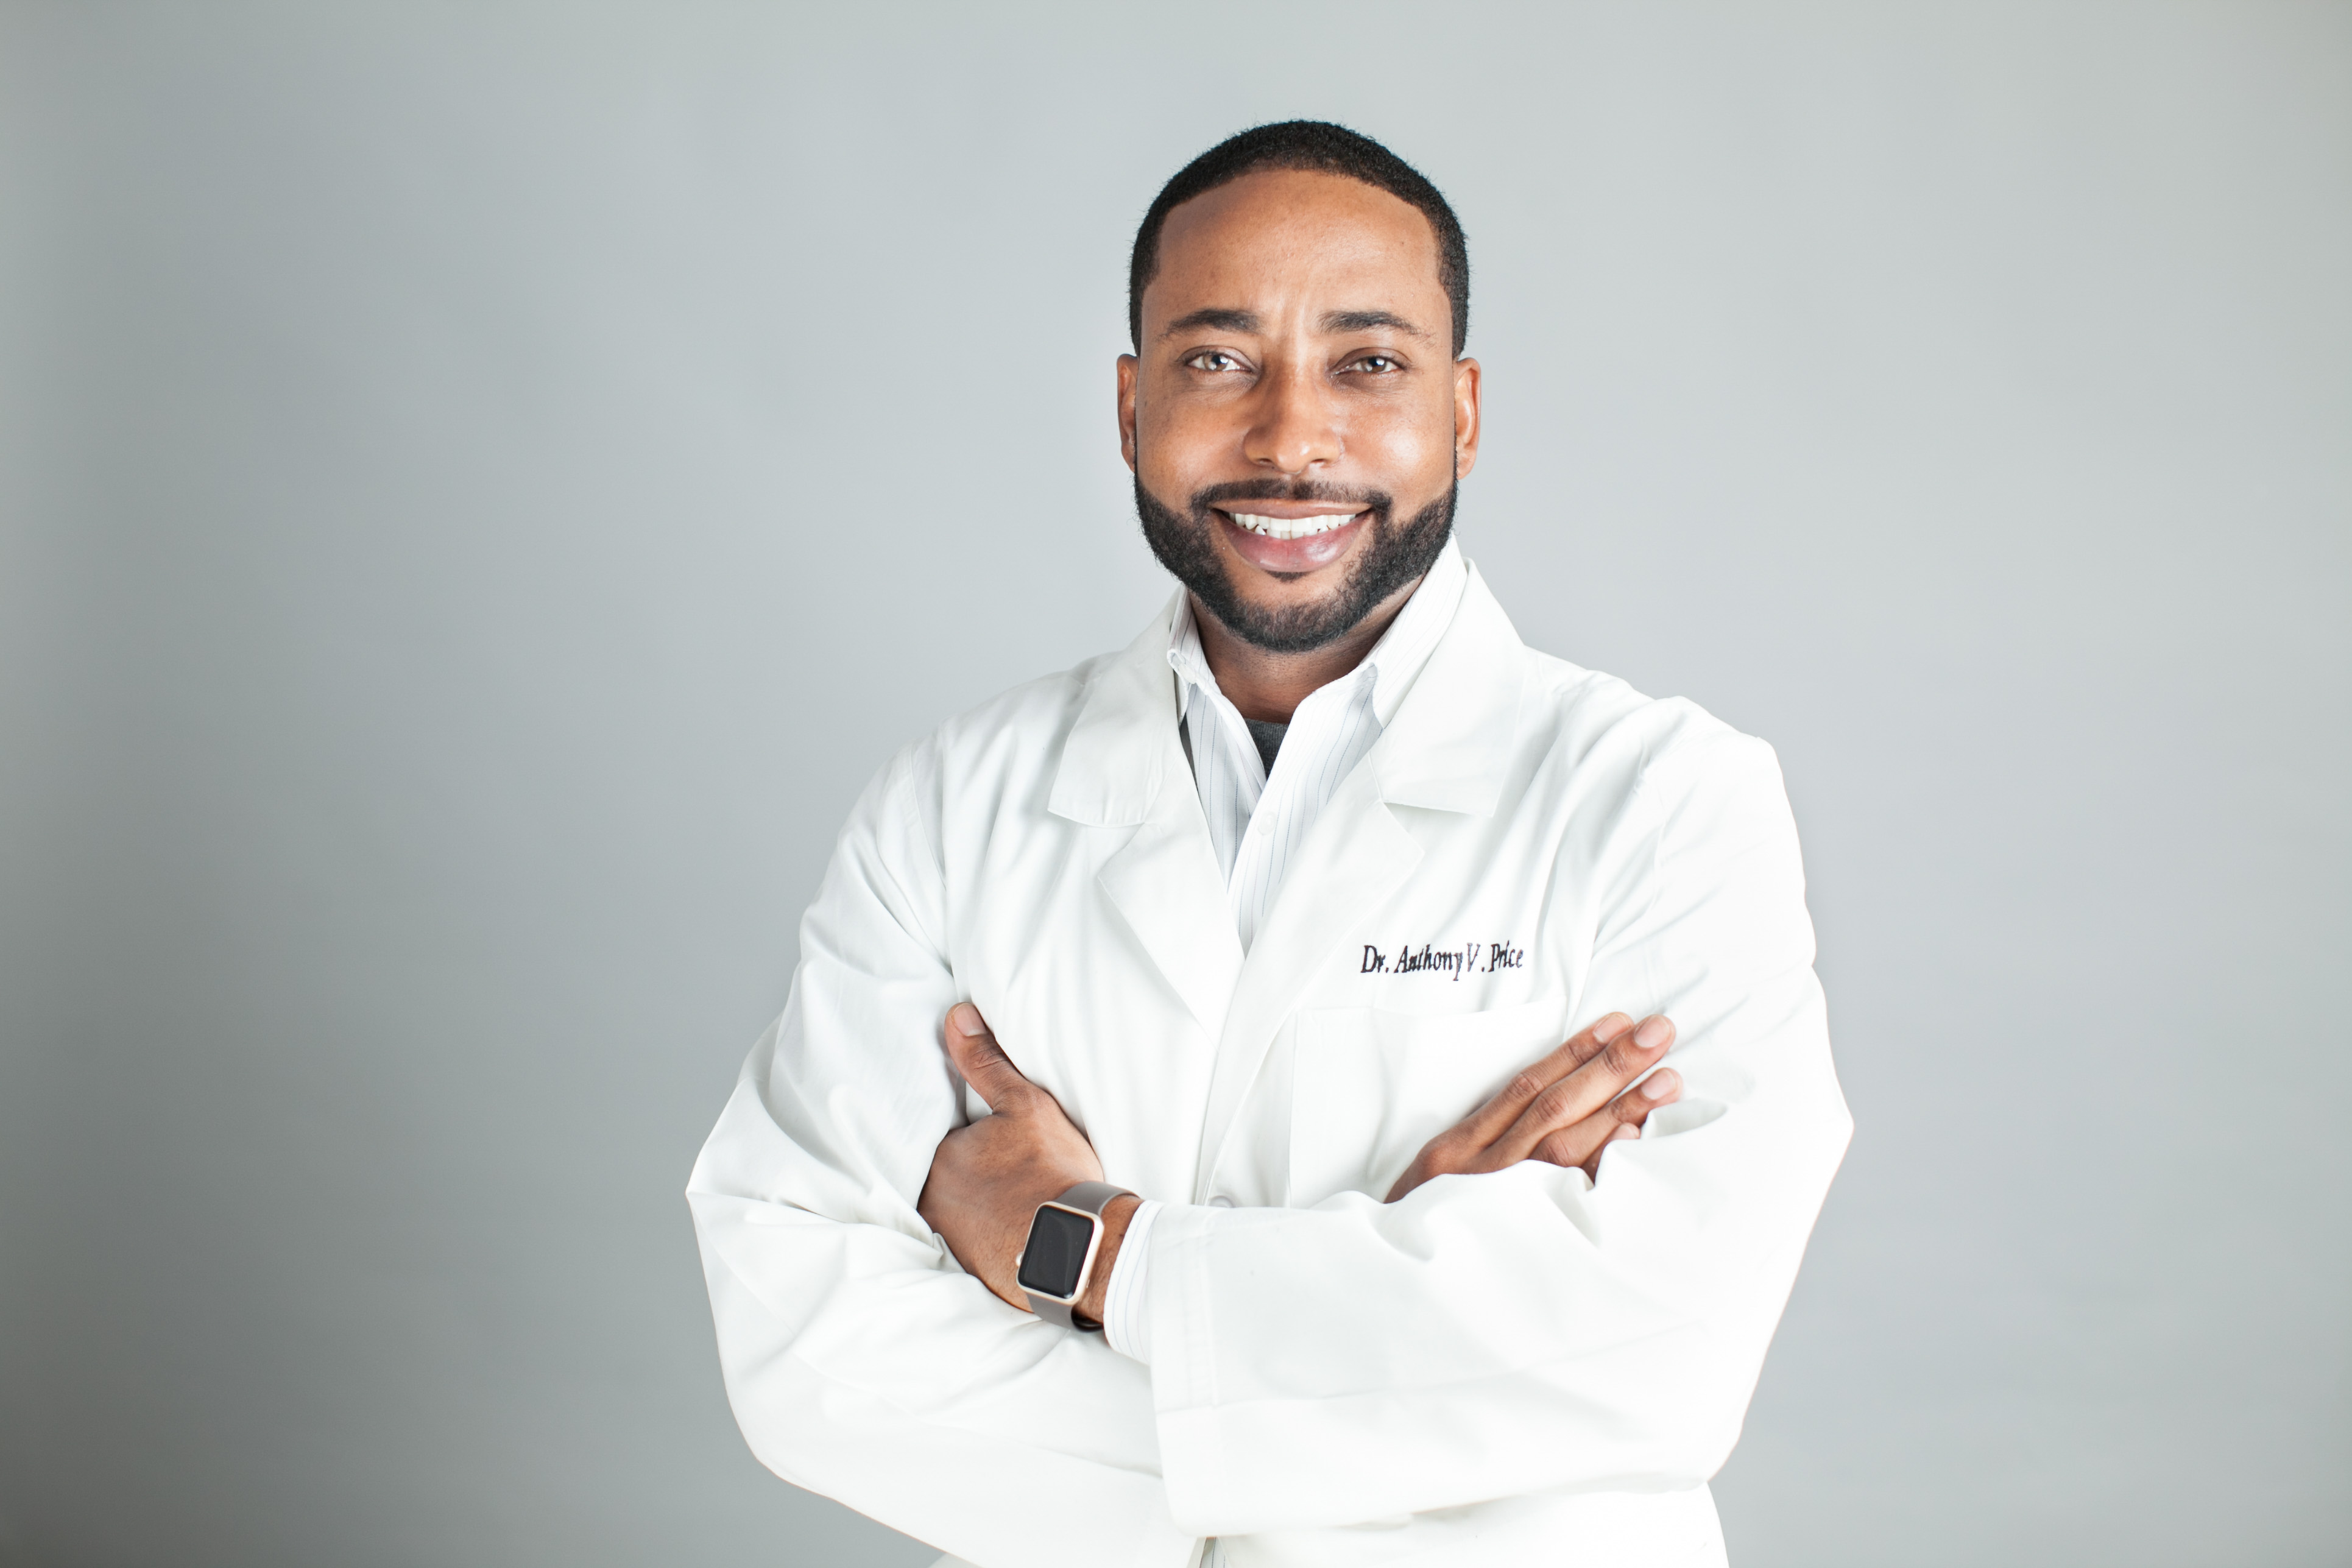 SmilesByDr.Price Black Owned Dental Practices